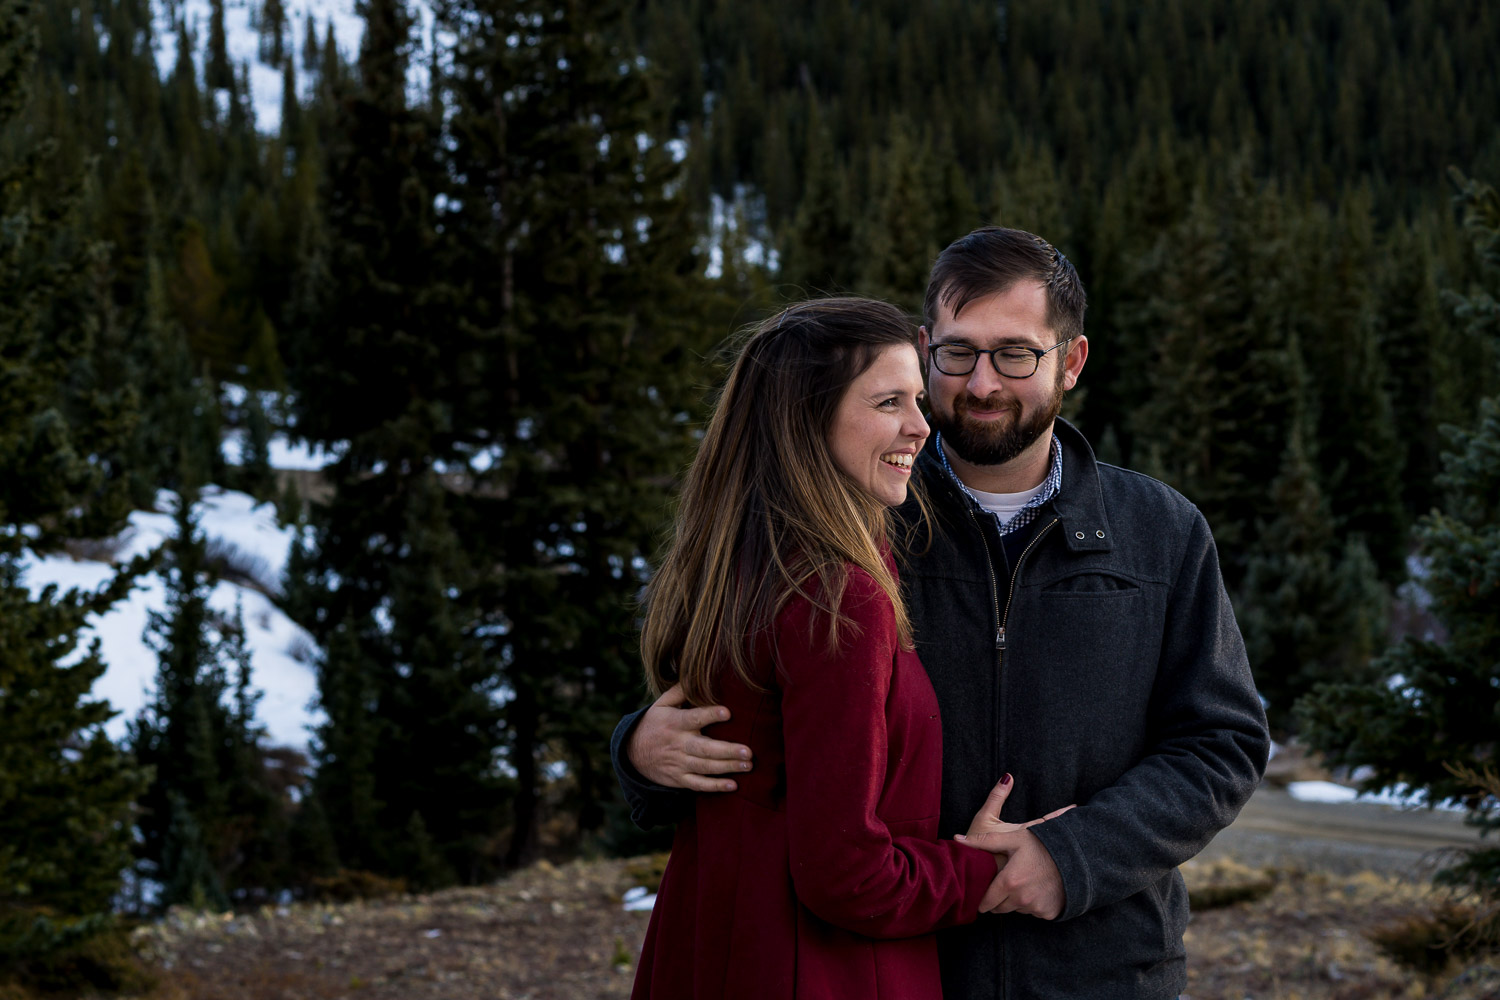 Colorado Mountain Engagement Photos in the forest